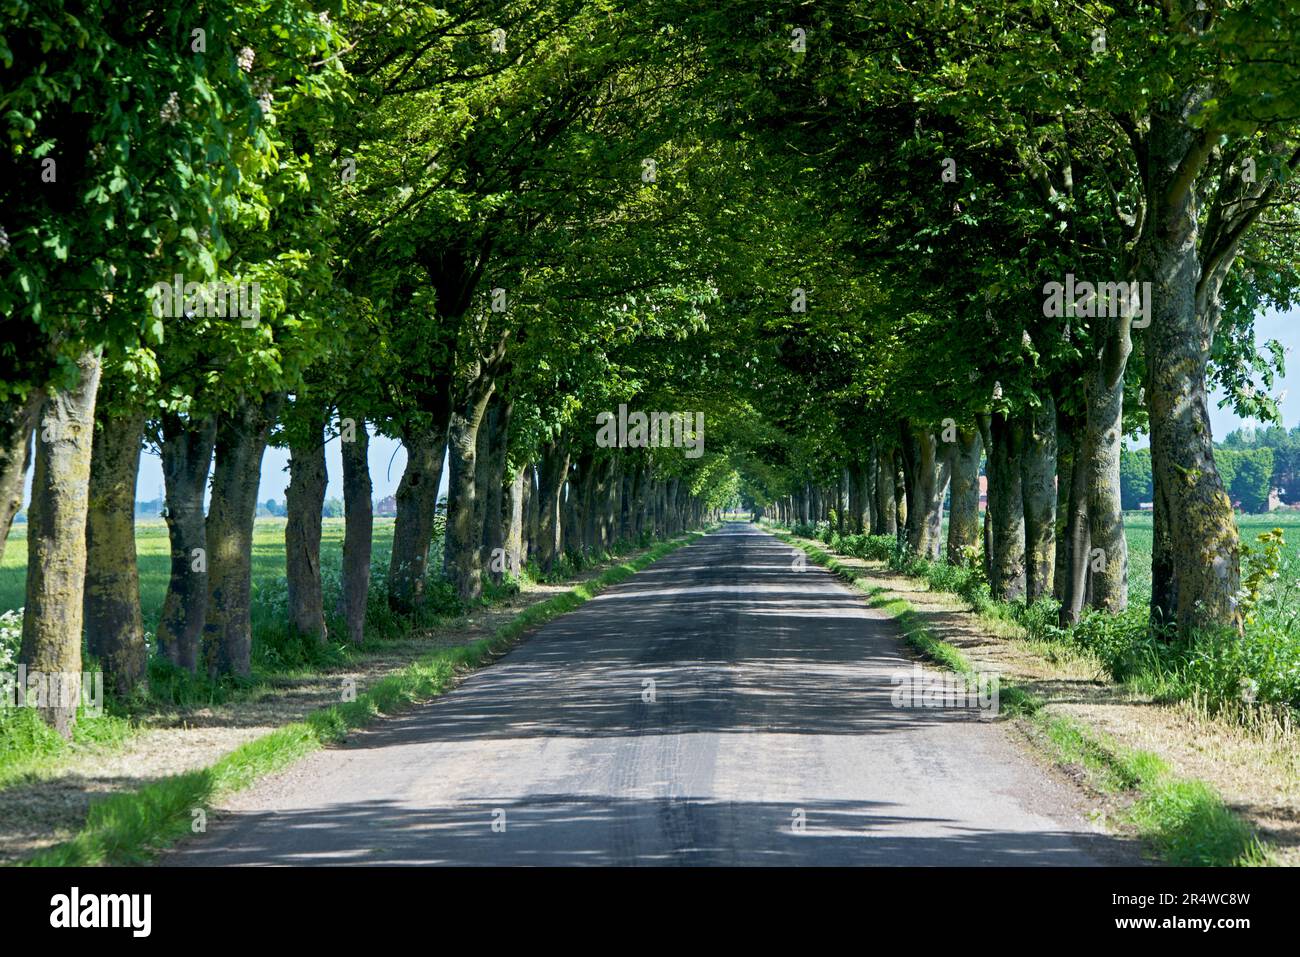 Tree-lined road in the community of Sunk Island, Holderness, East Yorkshire, England UK Stock Photo